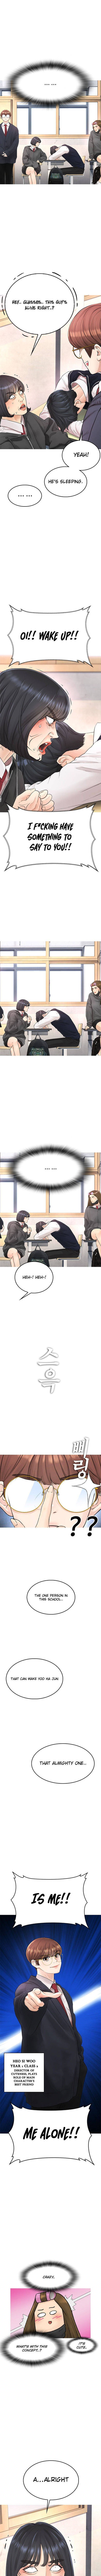 Highschool Lunch Dad Chapter 12